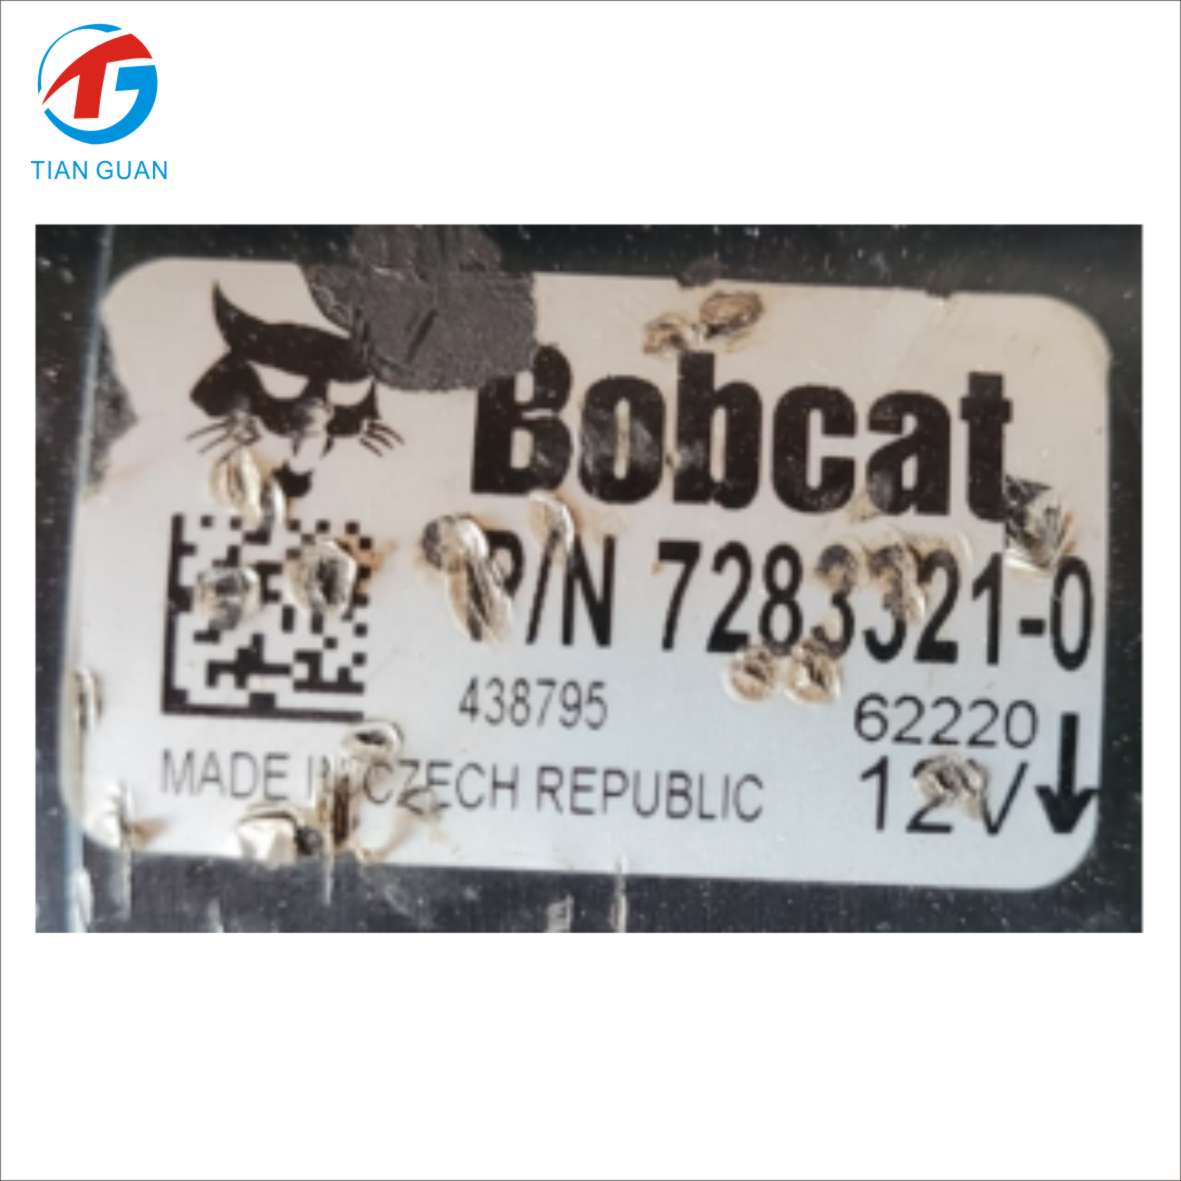 Bobcats new model starter is in development and sales  7283321-0    7283321  438795(图2)